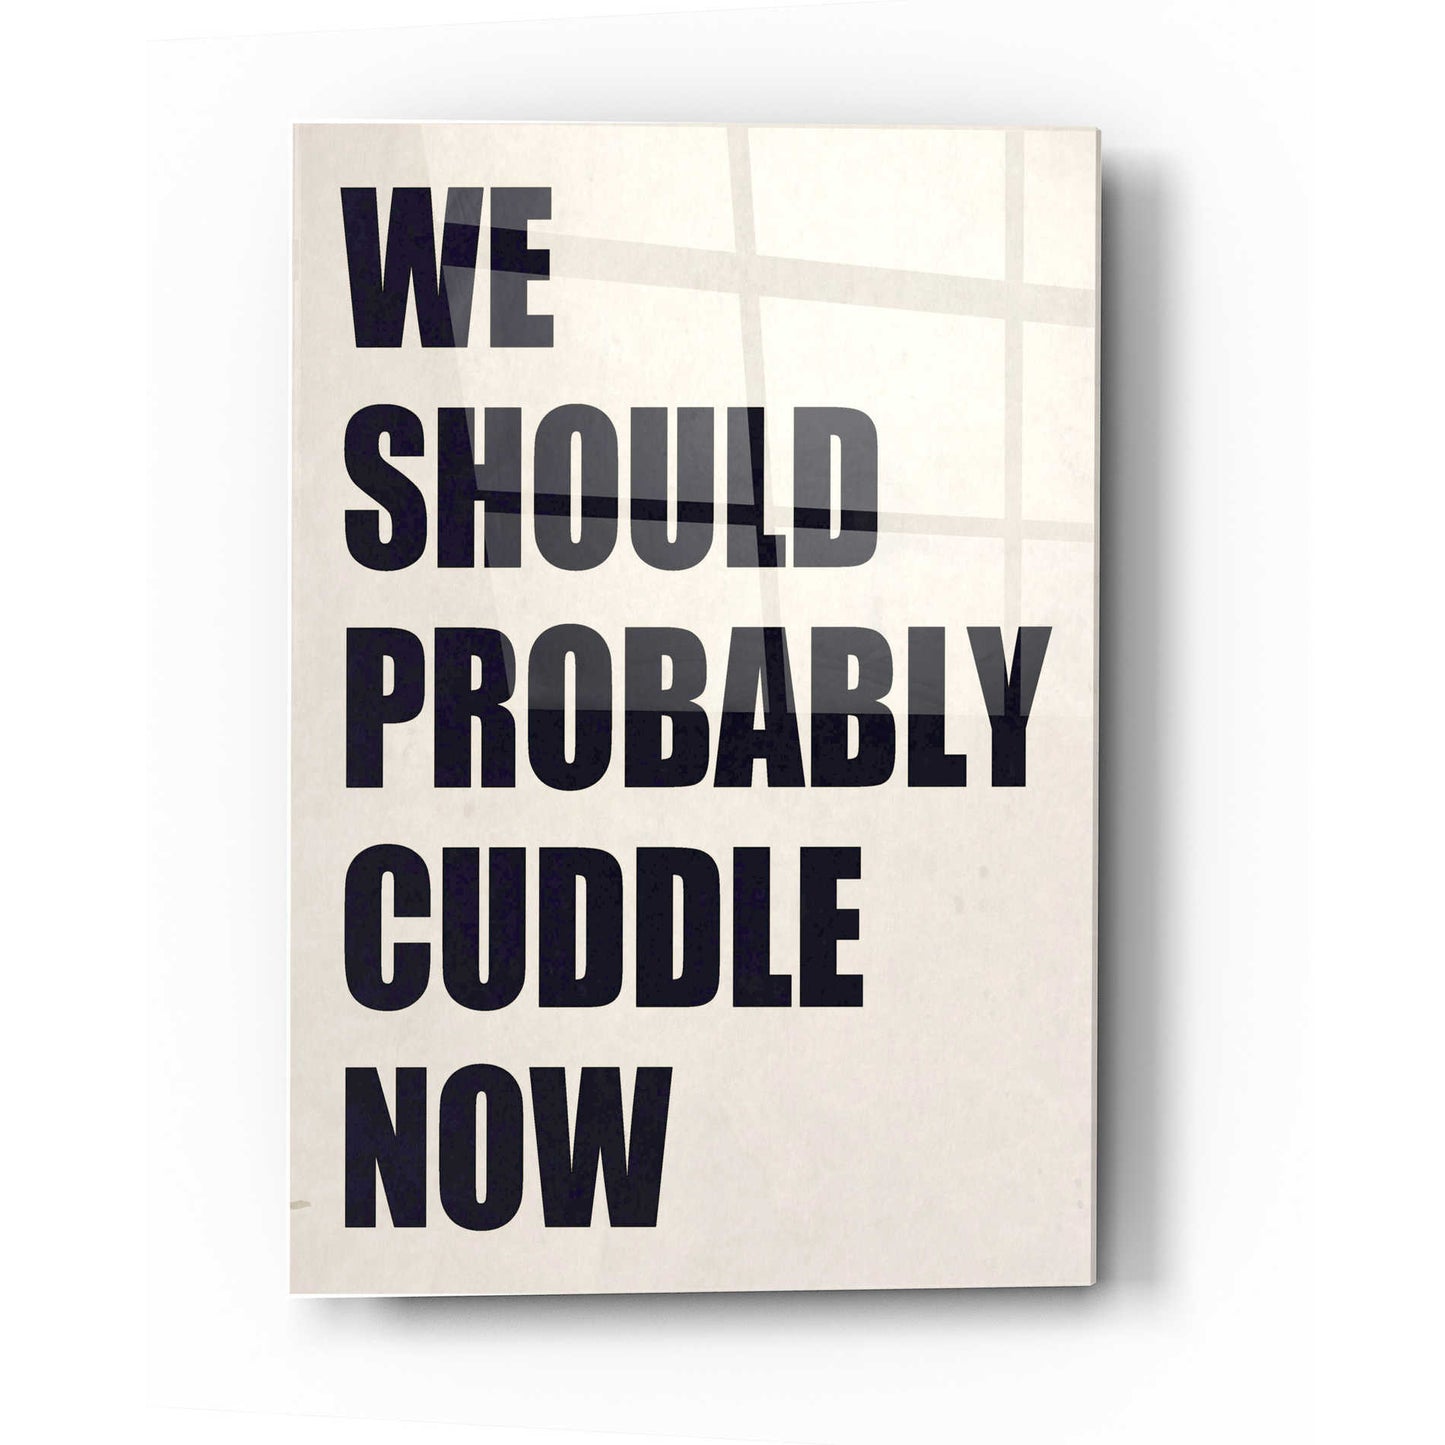 Epic Art 'We Should Probably Cuddle Now' by Nicklas Gustafsson, Acrylic Glass Wall Art,16x24